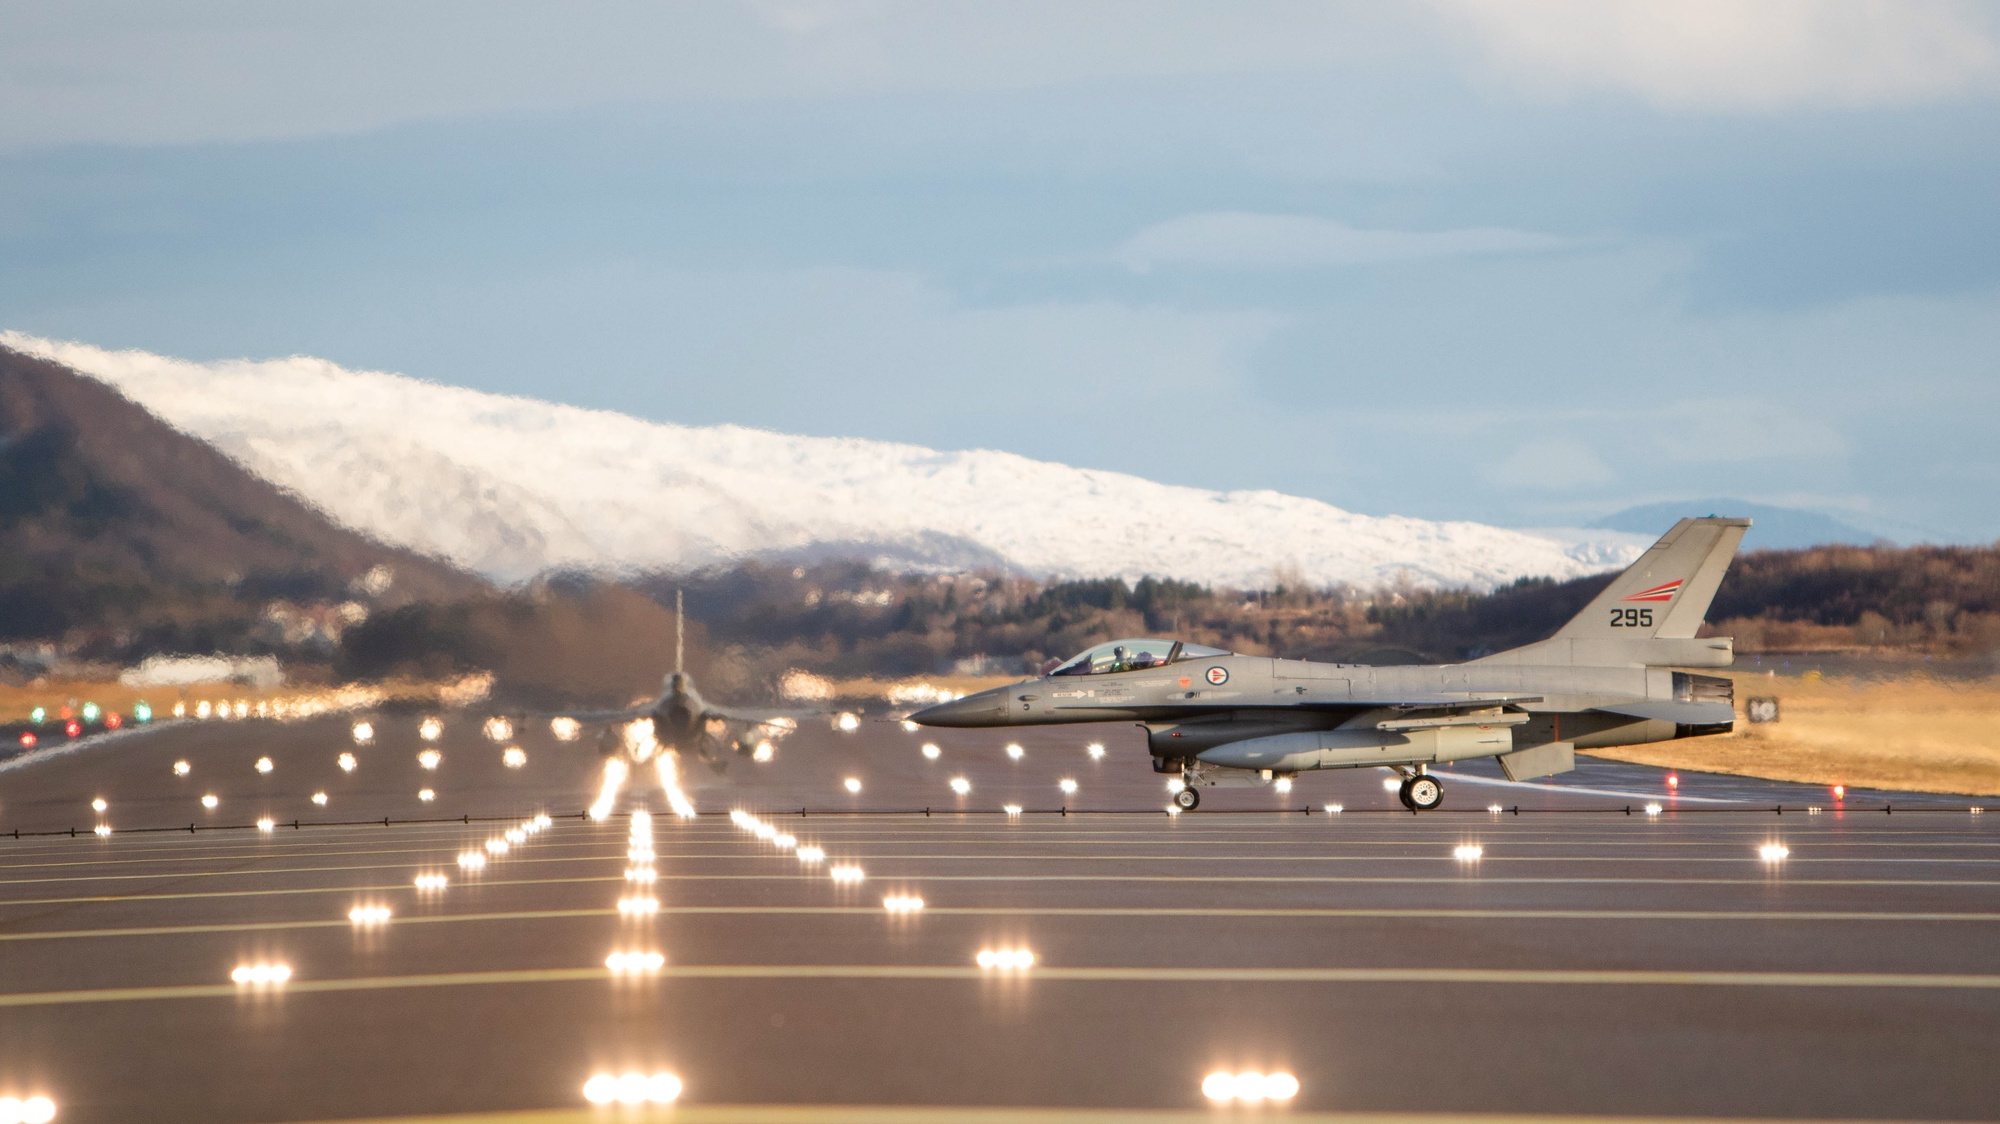 epa07136884 A handout photo made available by the Norwegian Armed Forces on 02 November 2018 shows a Norwegian F-16 preparing for take-off at Bodo Airport during Trident Juncture excercise in Norway, 31 October 2018. According to reports, some 50,000 participants from over 30 nations are expected to take part in the NATO-led military exercise in Norway from 25 October to 23 November 2018.  EPA/Hanne Hernes / Forsvaret HANDOUT  HANDOUT EDITORIAL USE ONLY/NO SALES *** Local Caption *** Norwegian F-16 getting ready to take off from Bodø Air Station during the exercise Trident Juncture 2018.